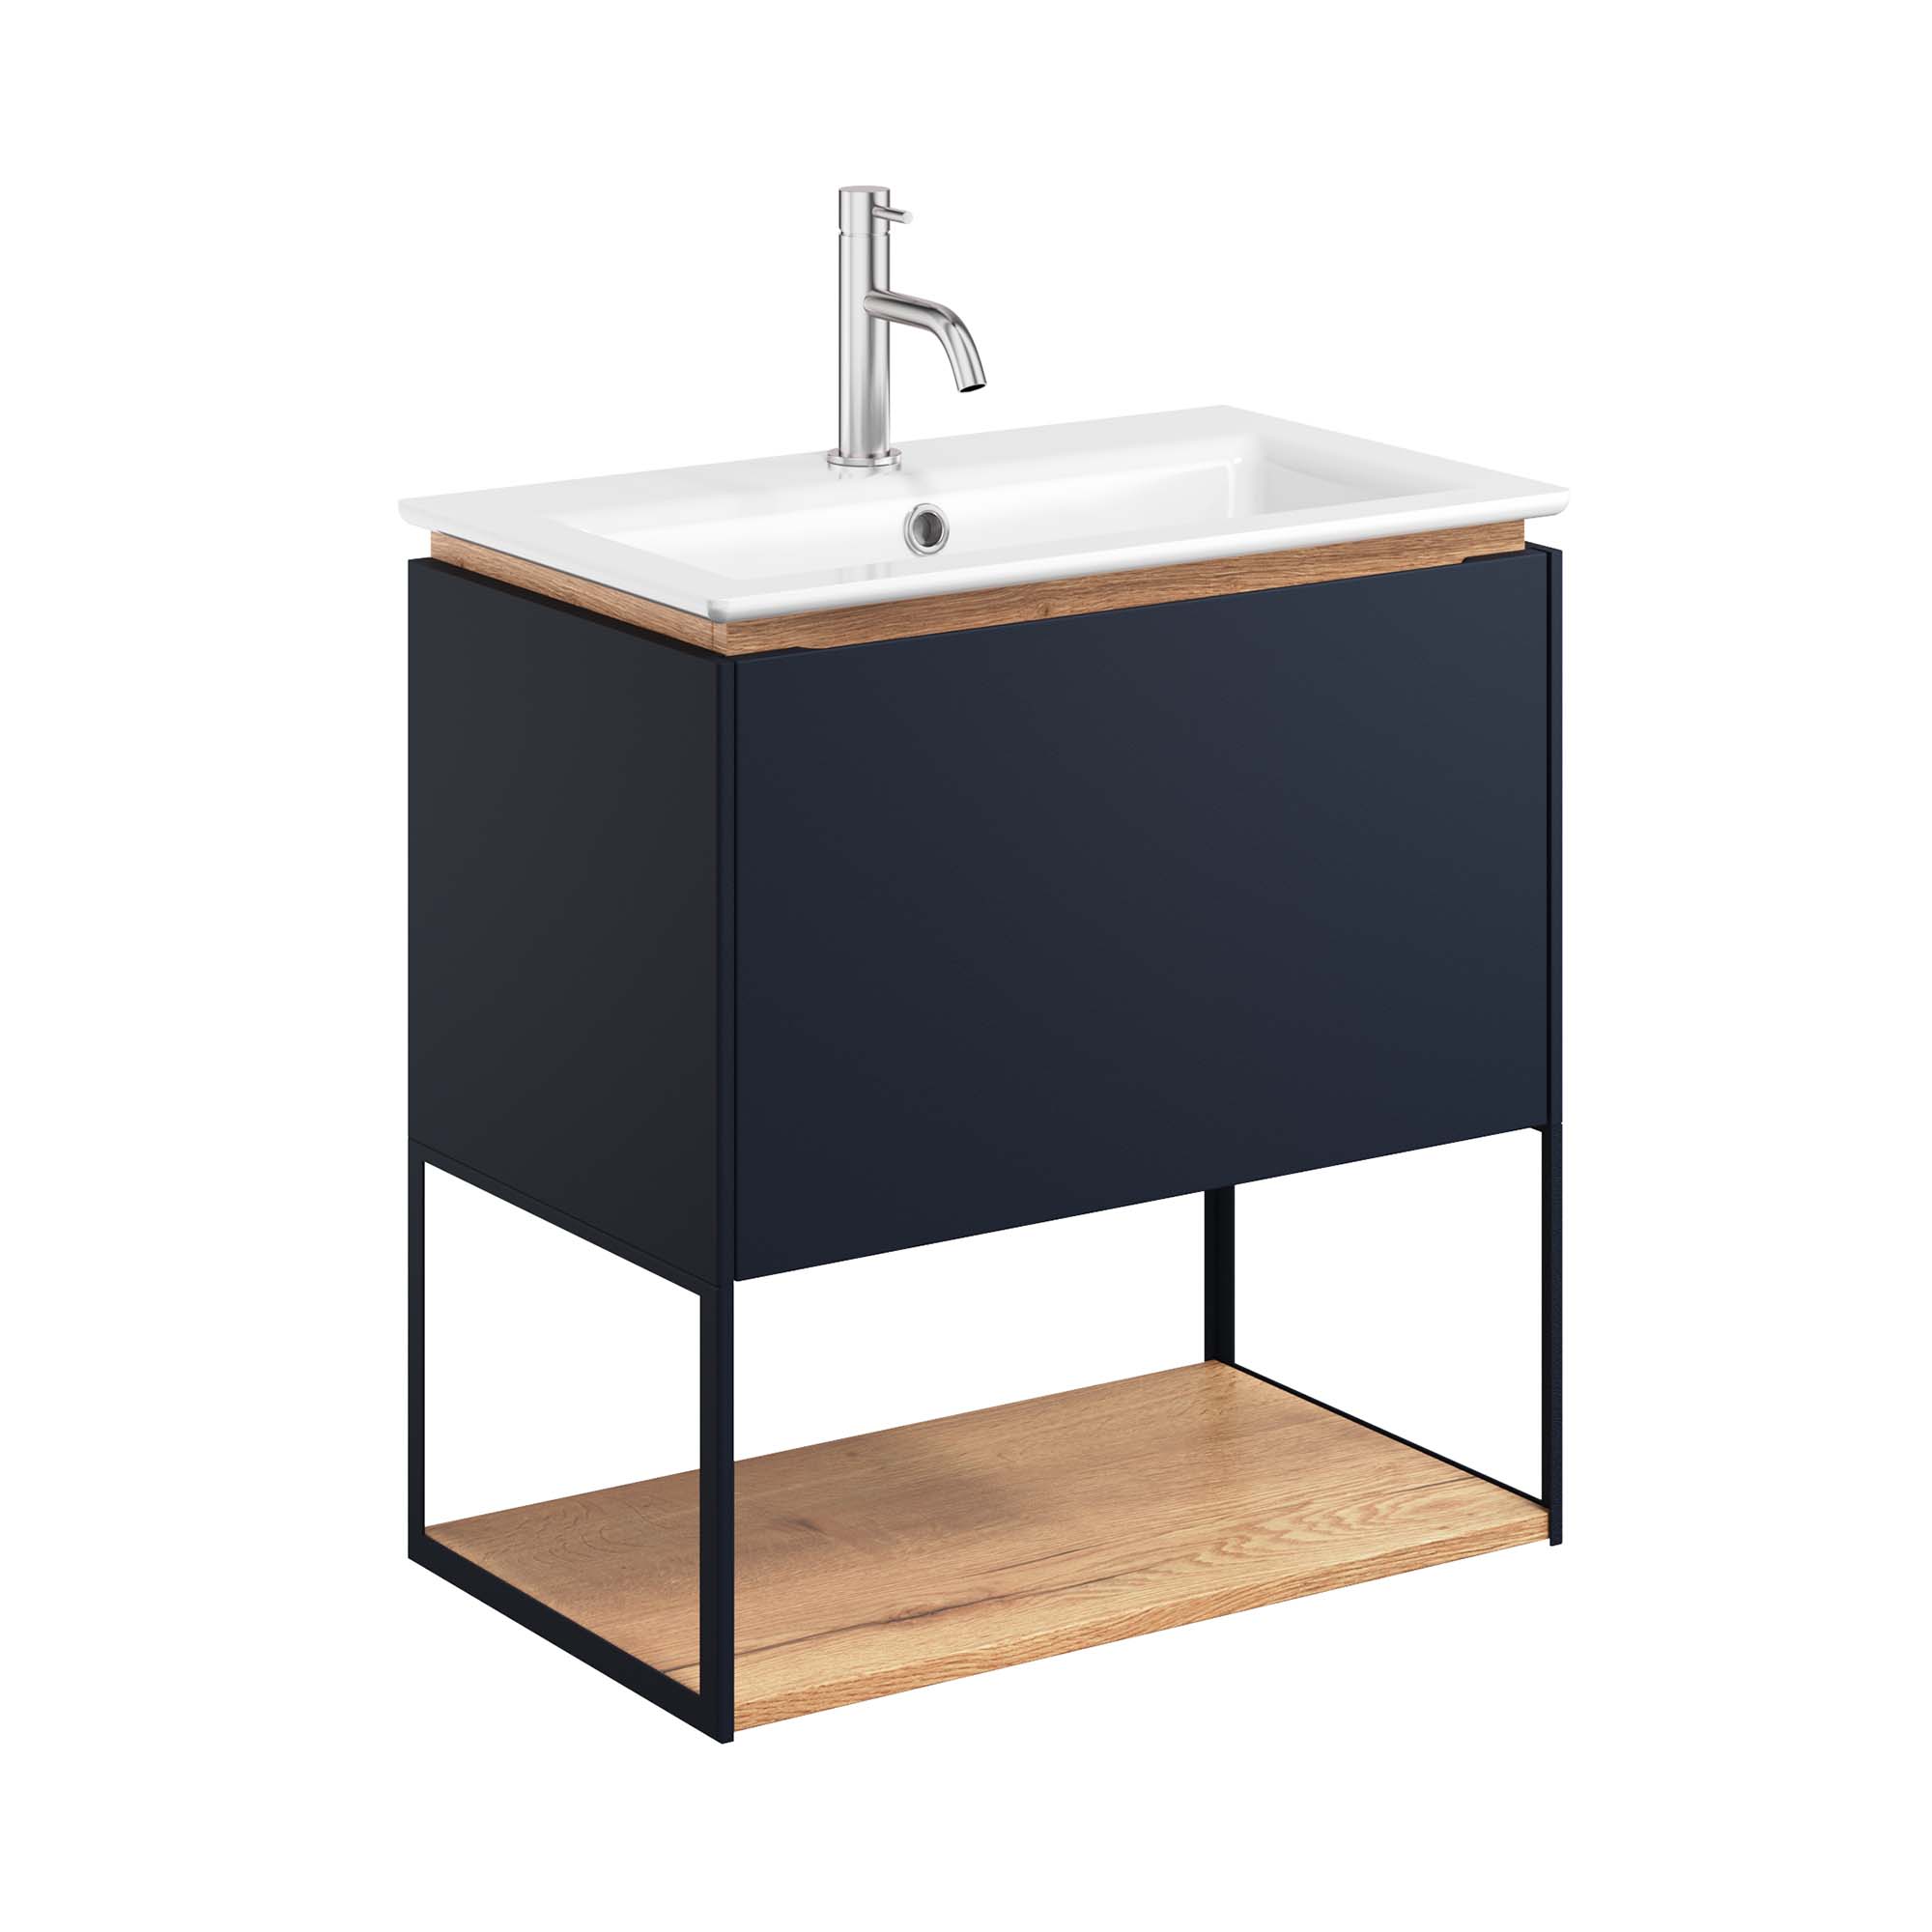 crosswater mada 600 wall mounted vanity unit with mineral marble basin, shelf and frame indigo blue